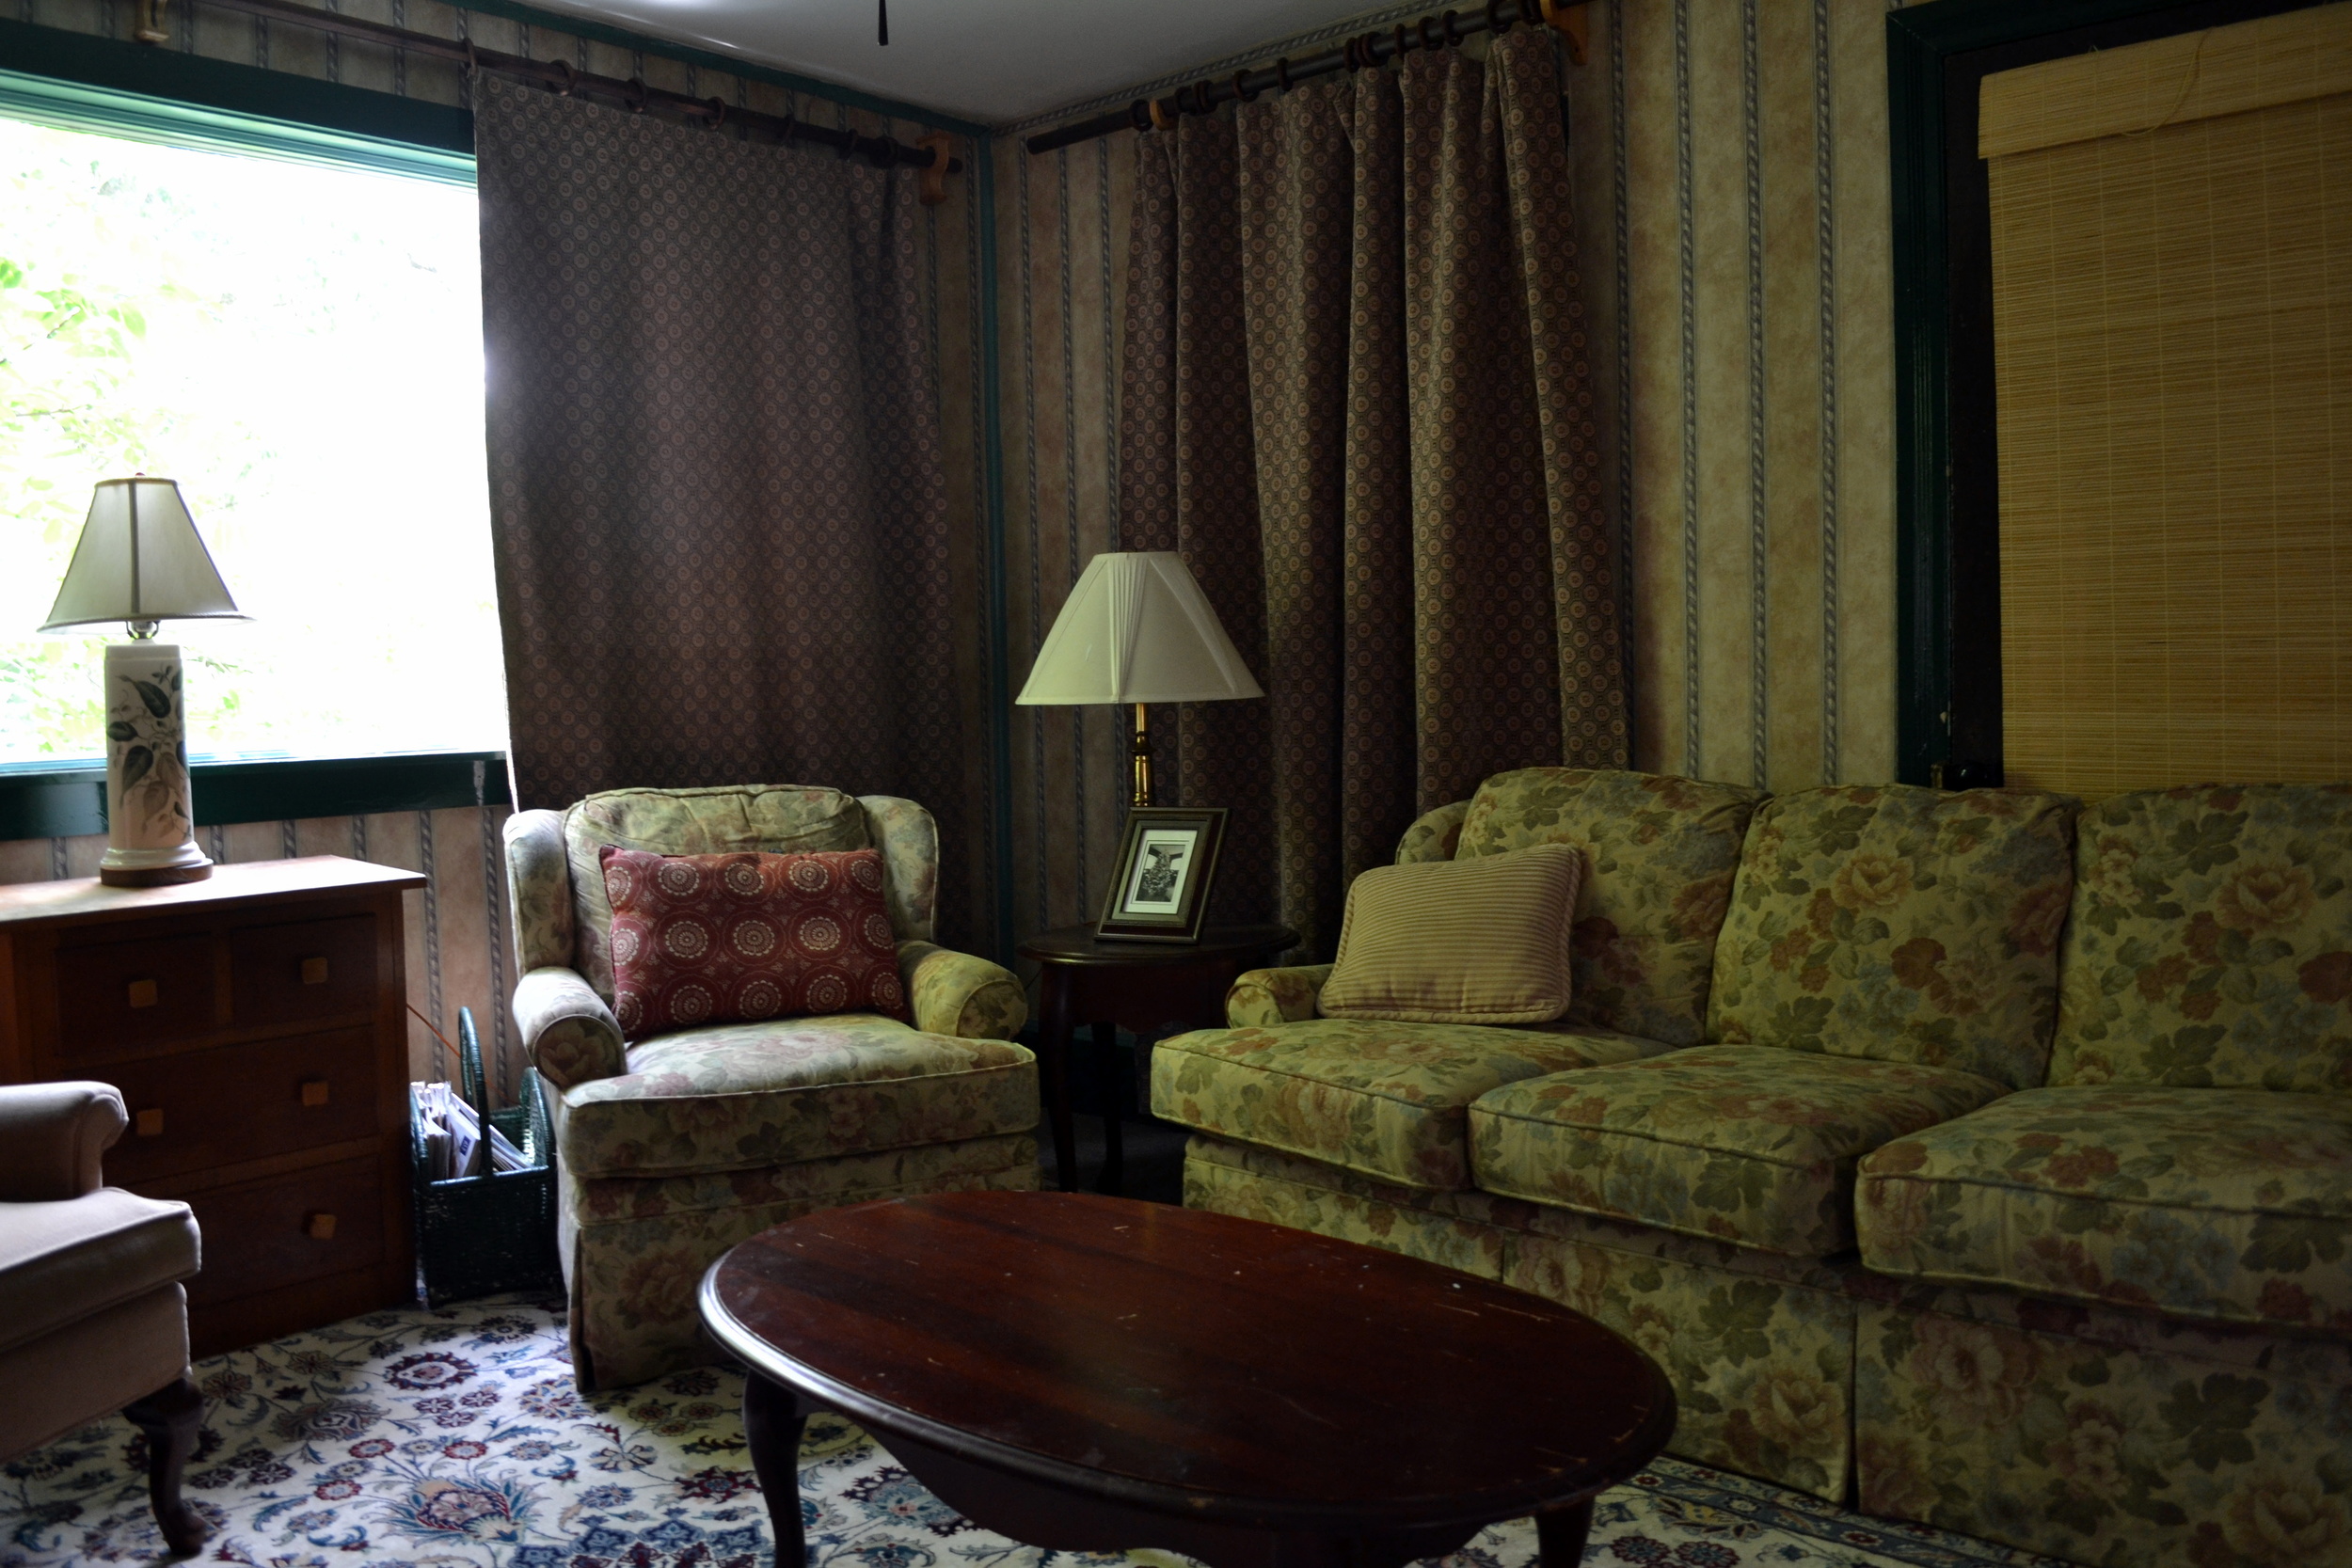  Antiques and wallpaper make the house seem just as comforting and friendly as it was years ago. 